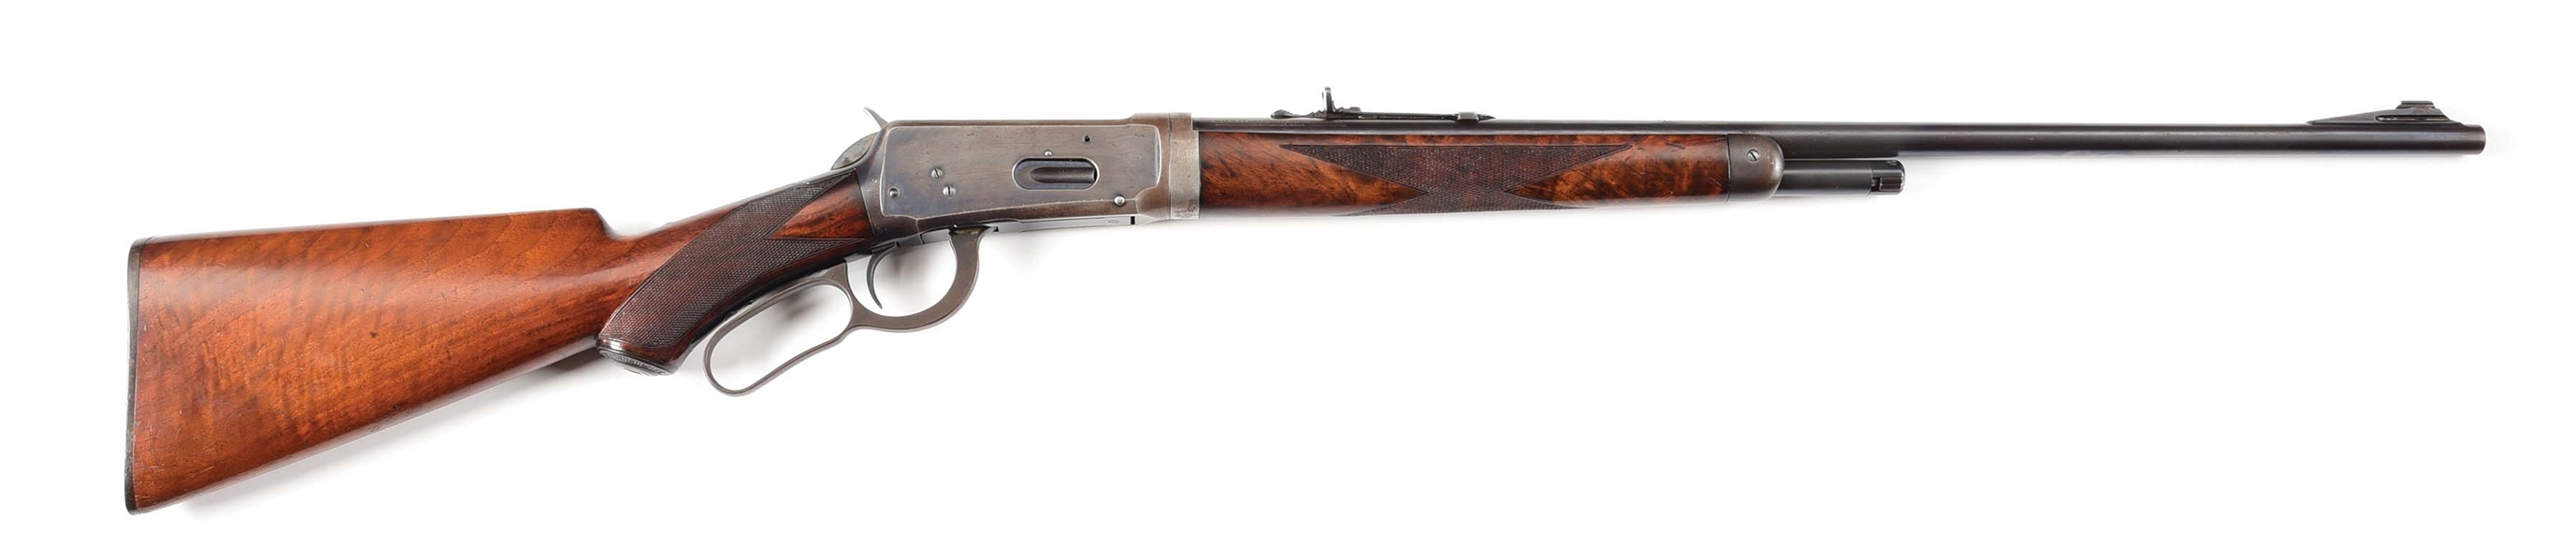 (C) WINCHESTER MODEL 1894 DELUXE TAKEDOWN LEVER ACTION RIFLE.